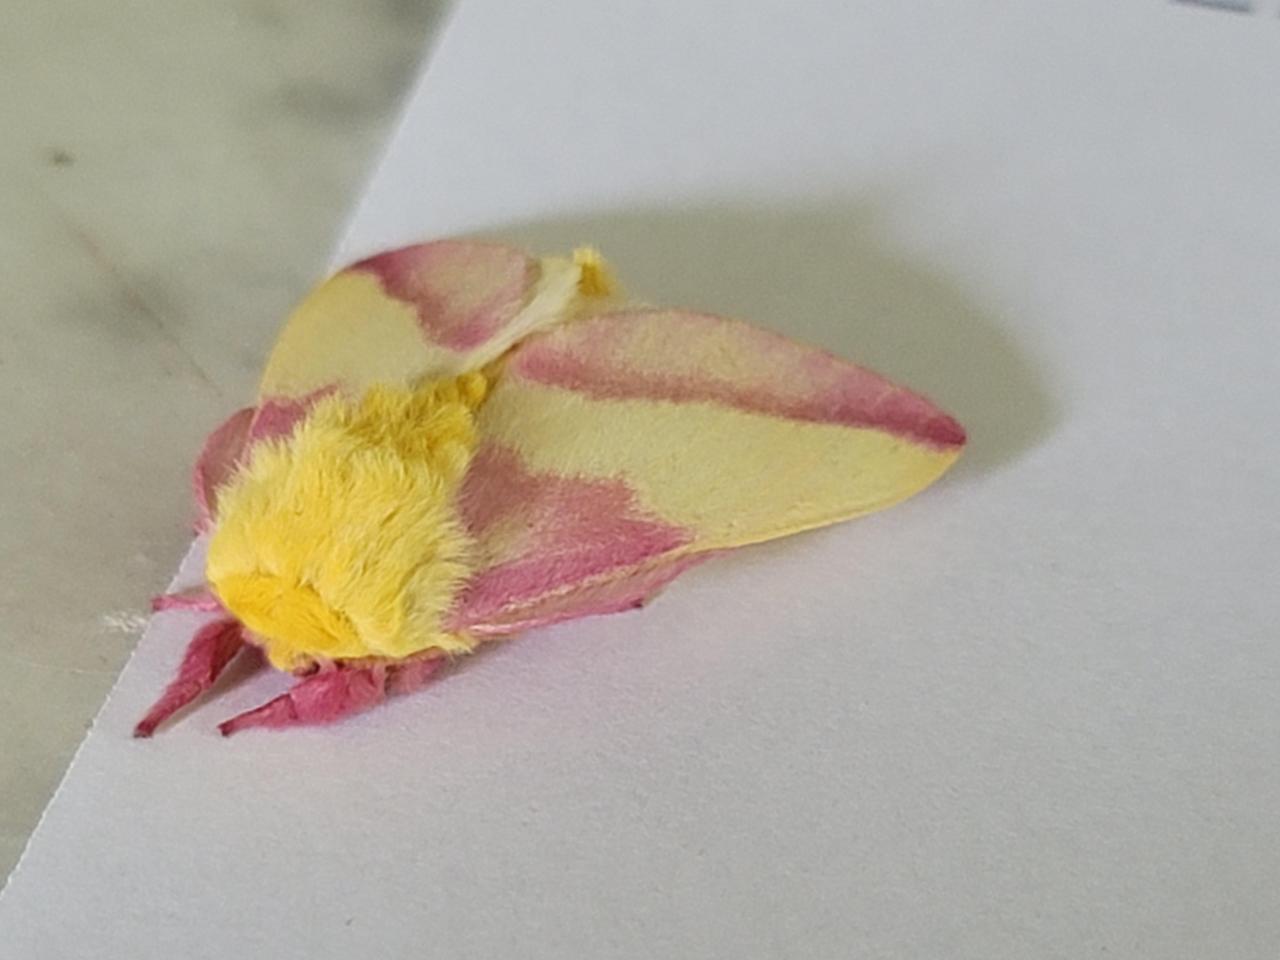 found this fluffy pink and yellow baby sleeping on a sheet of paper #Cute#Sweet#Aww#awesome